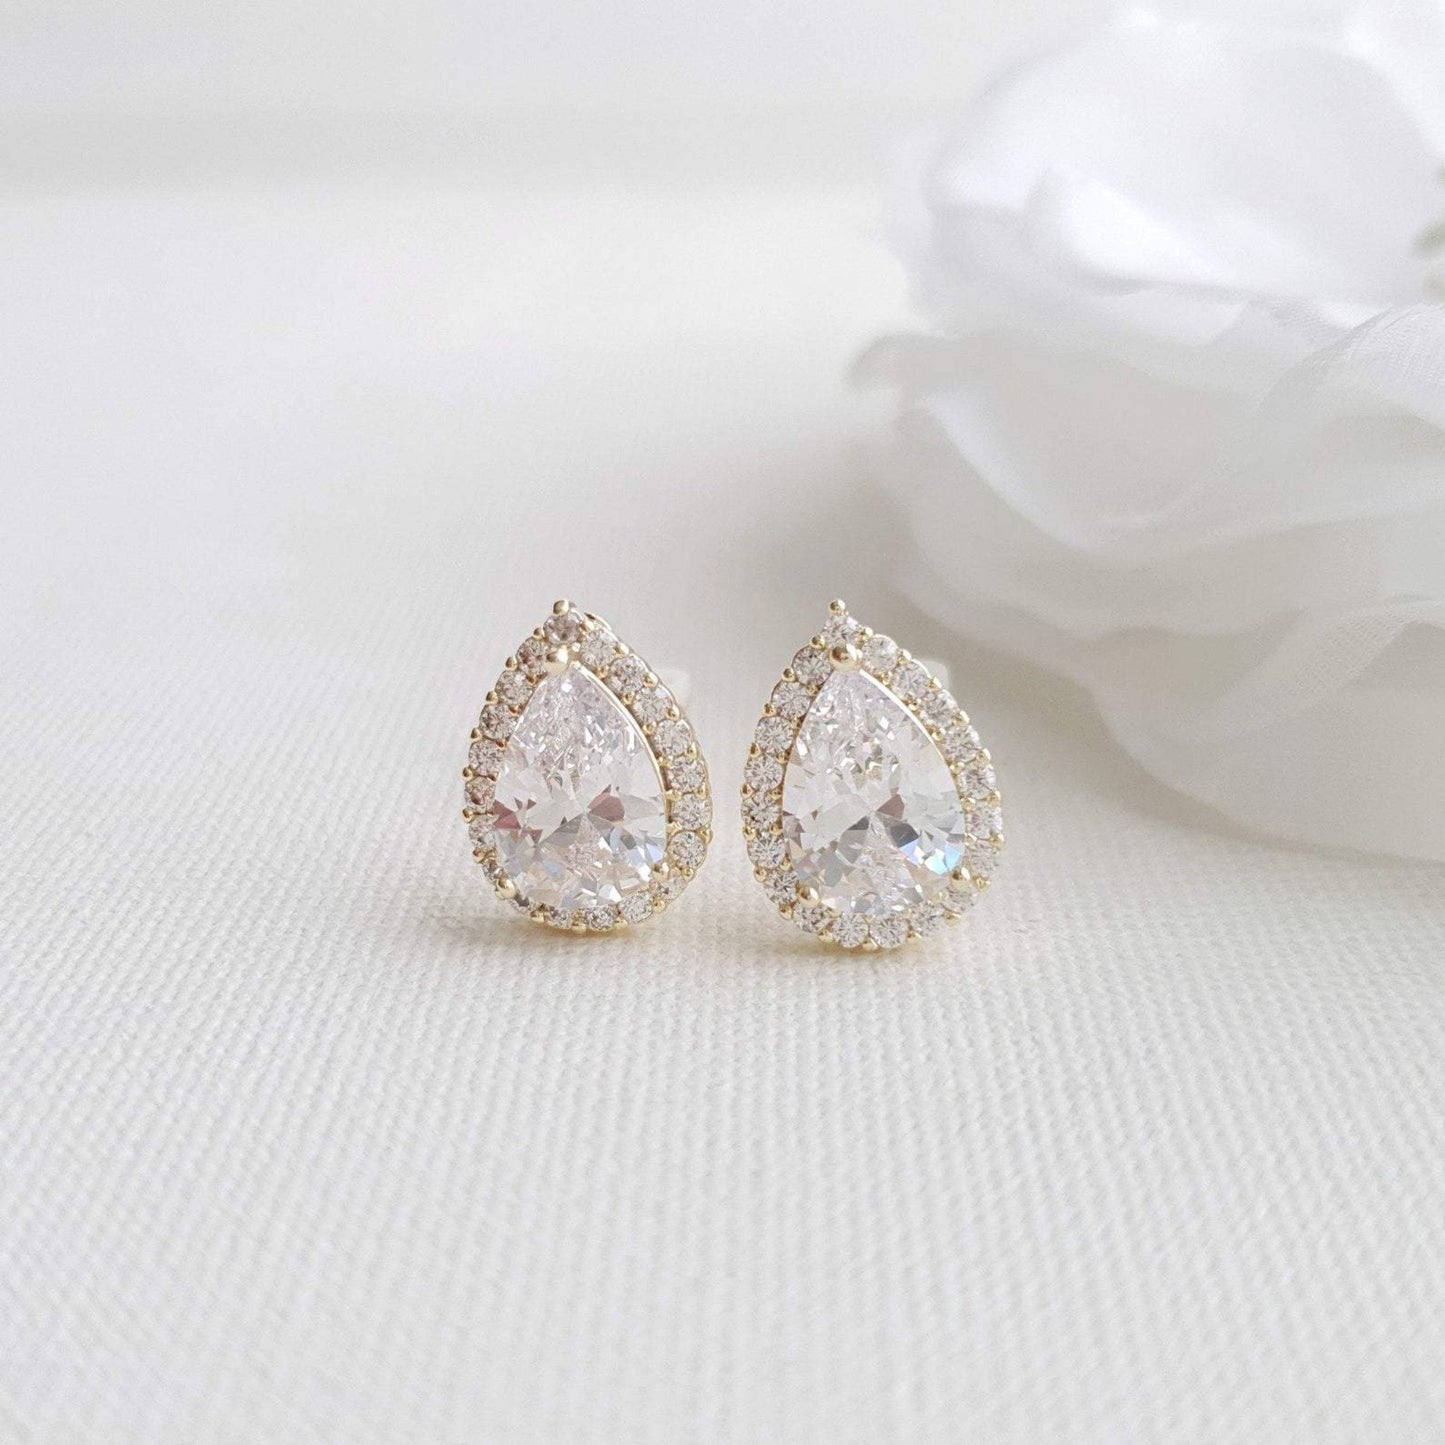 14K gold Teardrop Shaped Clip On stud earrings for Brides and Weddings